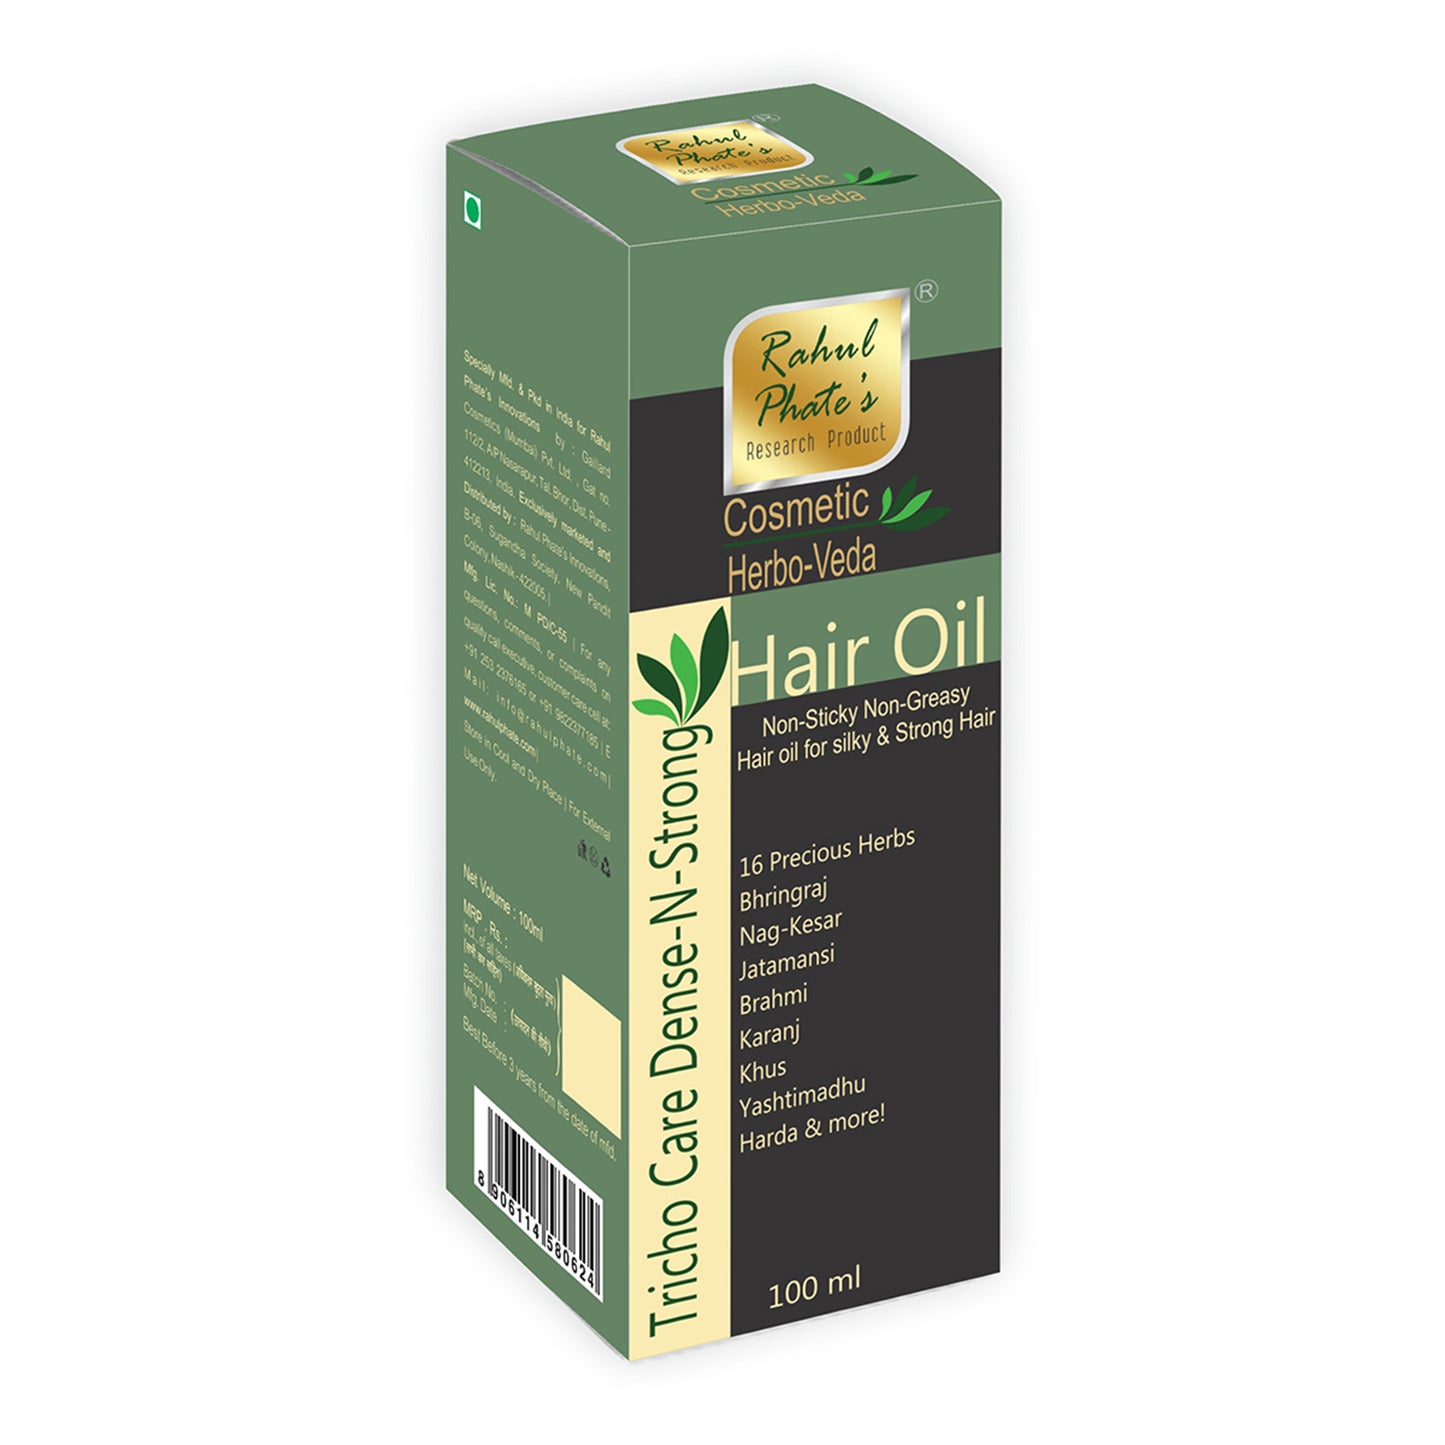 Tricho Care Dense-N-Strong Hair  Oil 100ml -  Buy one Get one Free